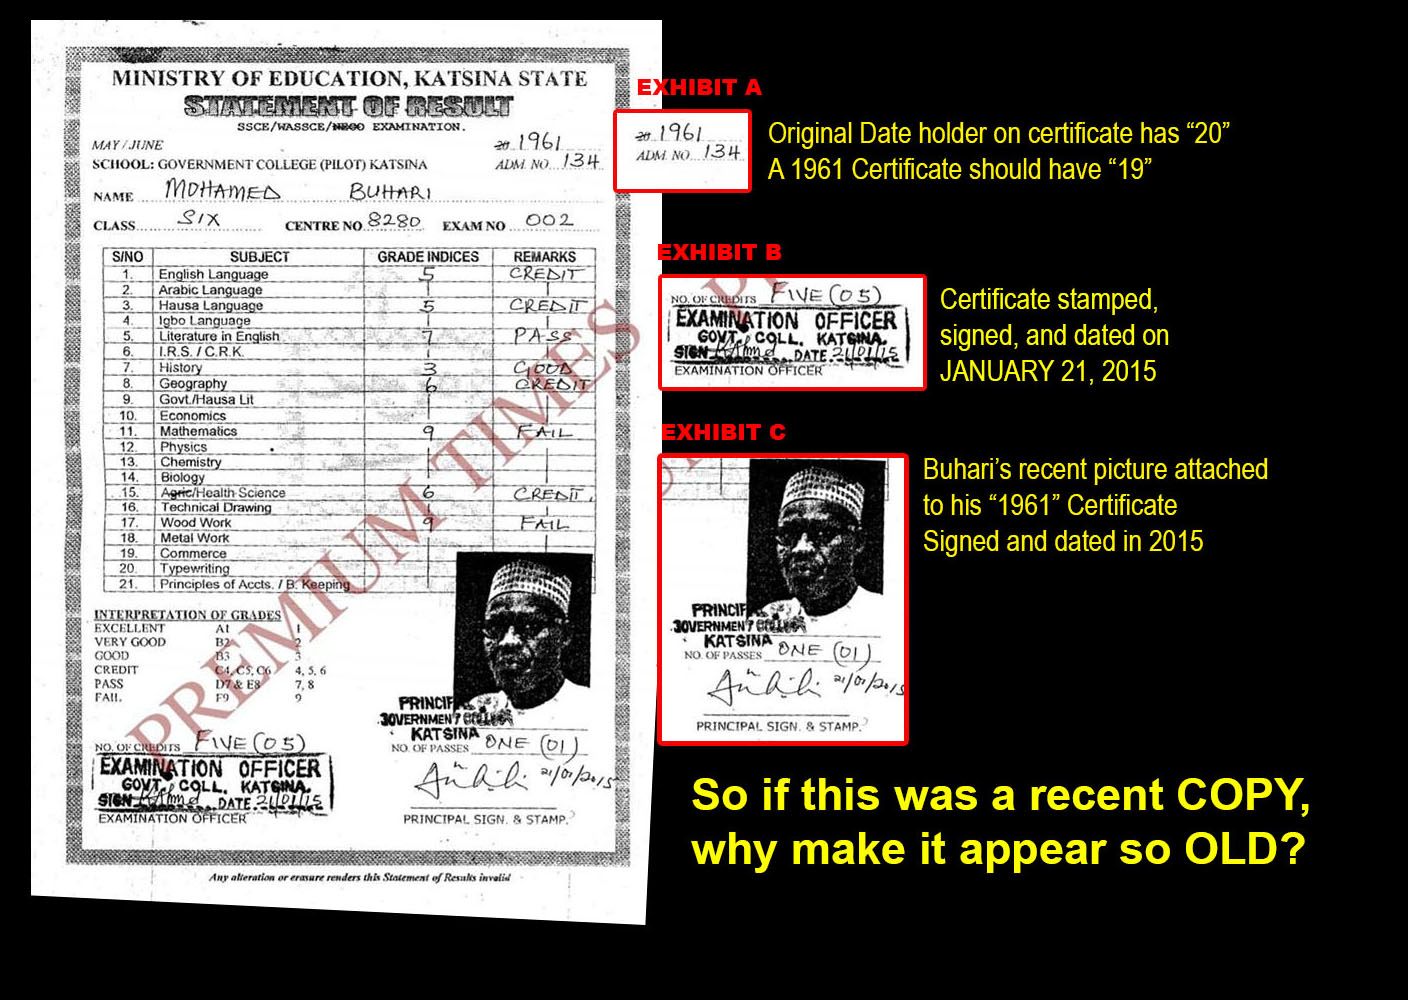 Premium Times disgracefully released what was believed to be Buhari’s certificate, but suspicions quickly emerged; the statement was printed on the letter head paper of the Katsina State Ministry of Education, showing an examination took place in 1961 with a recent picture (2014) of the candidate, Buhari.